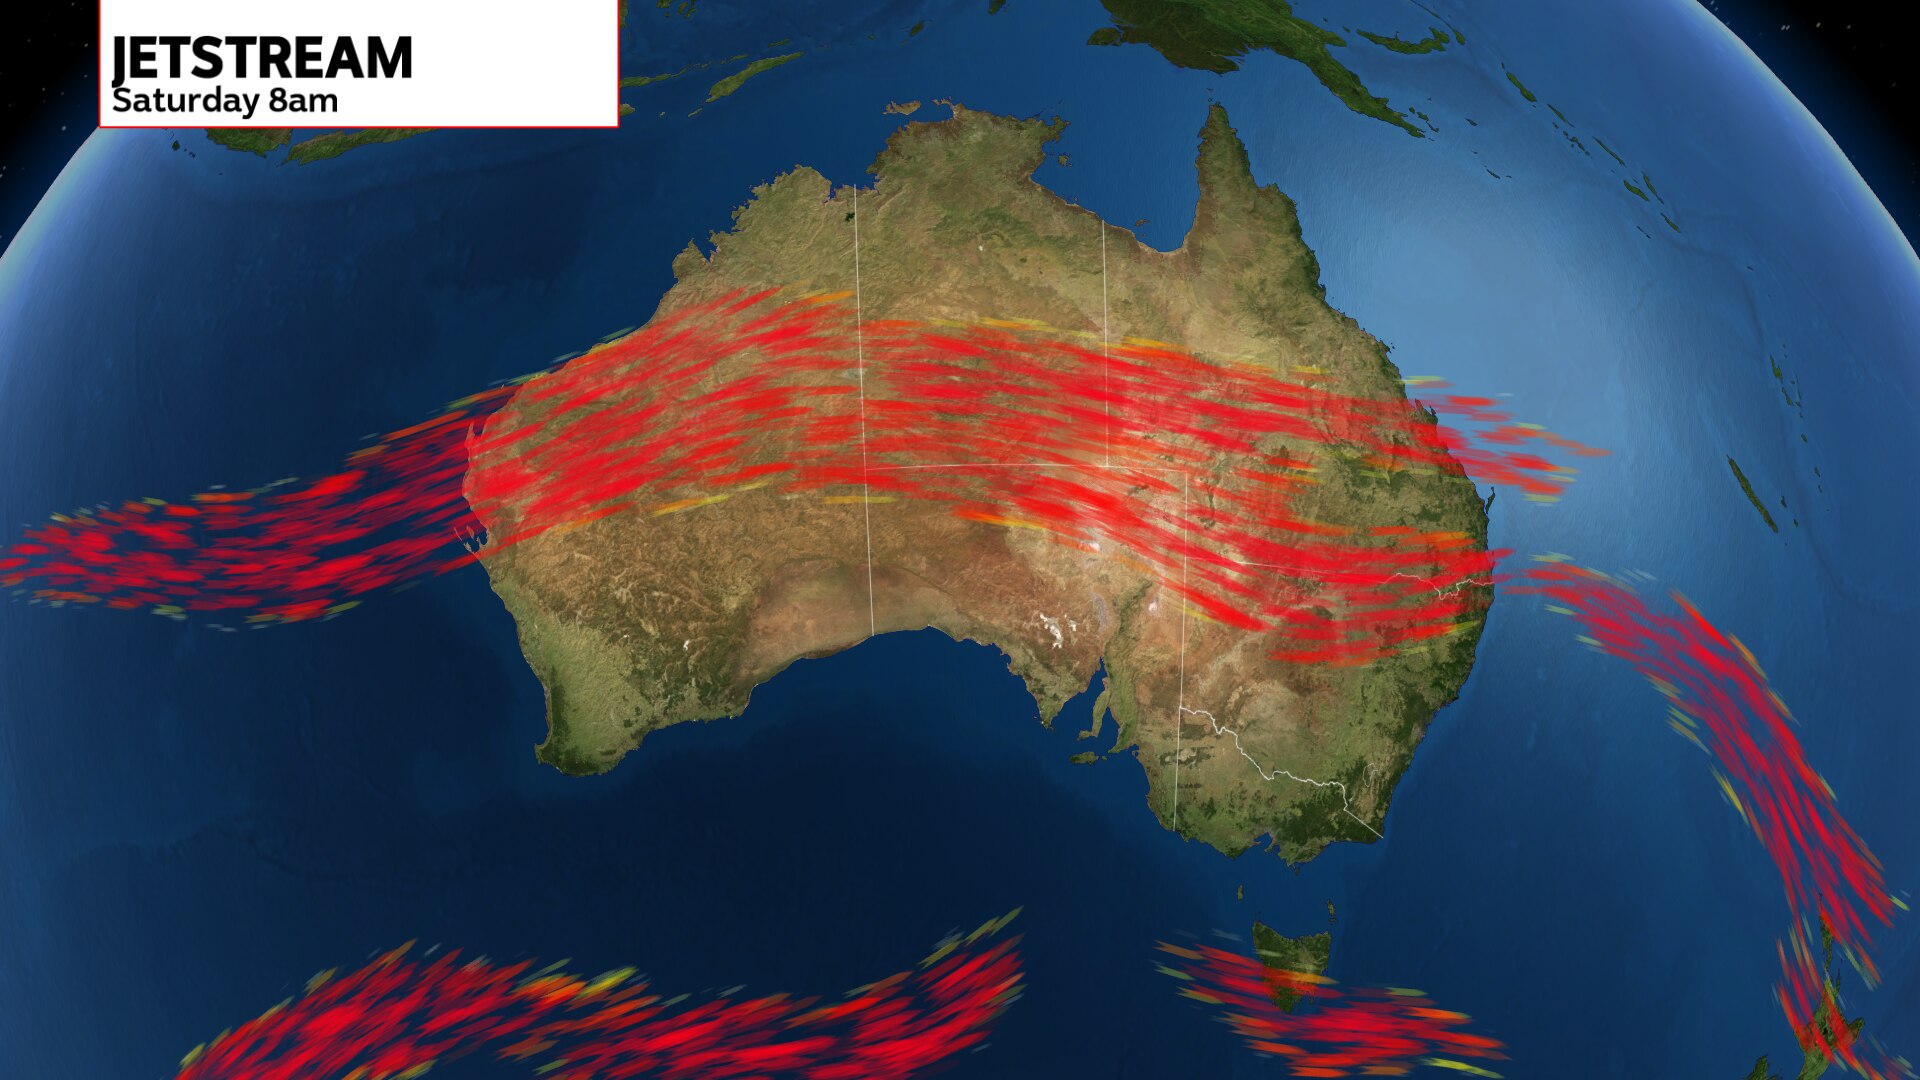 a weather map of australia showing a read streak representing a jetstream